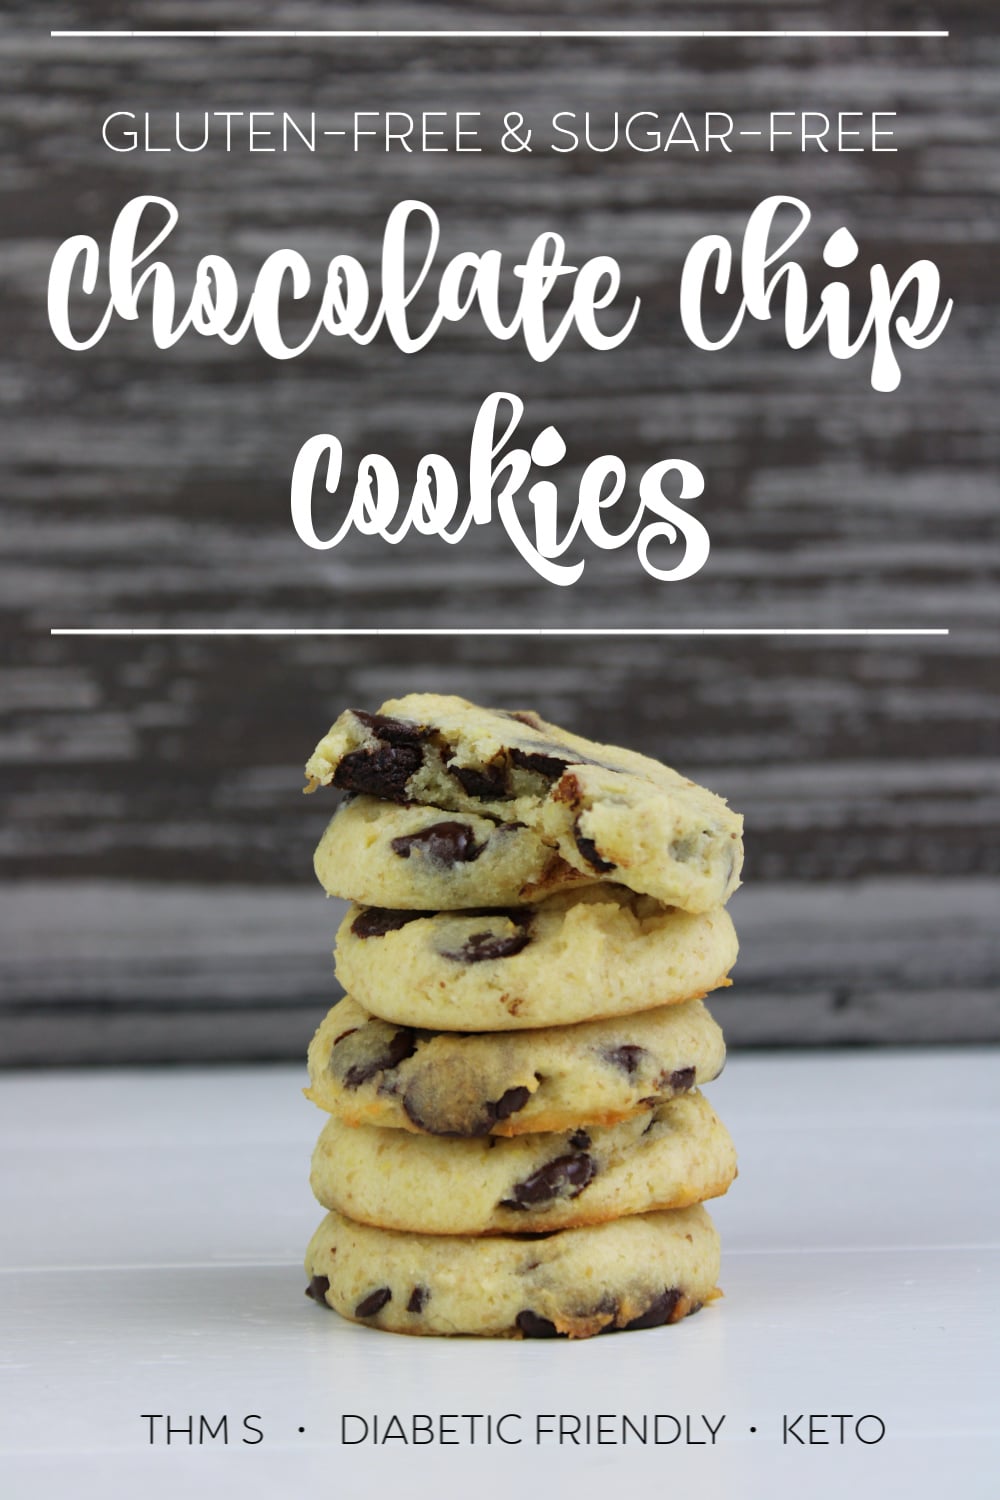 Gluten-Free Sugar-Free Chocolate Chip Cookies stacked